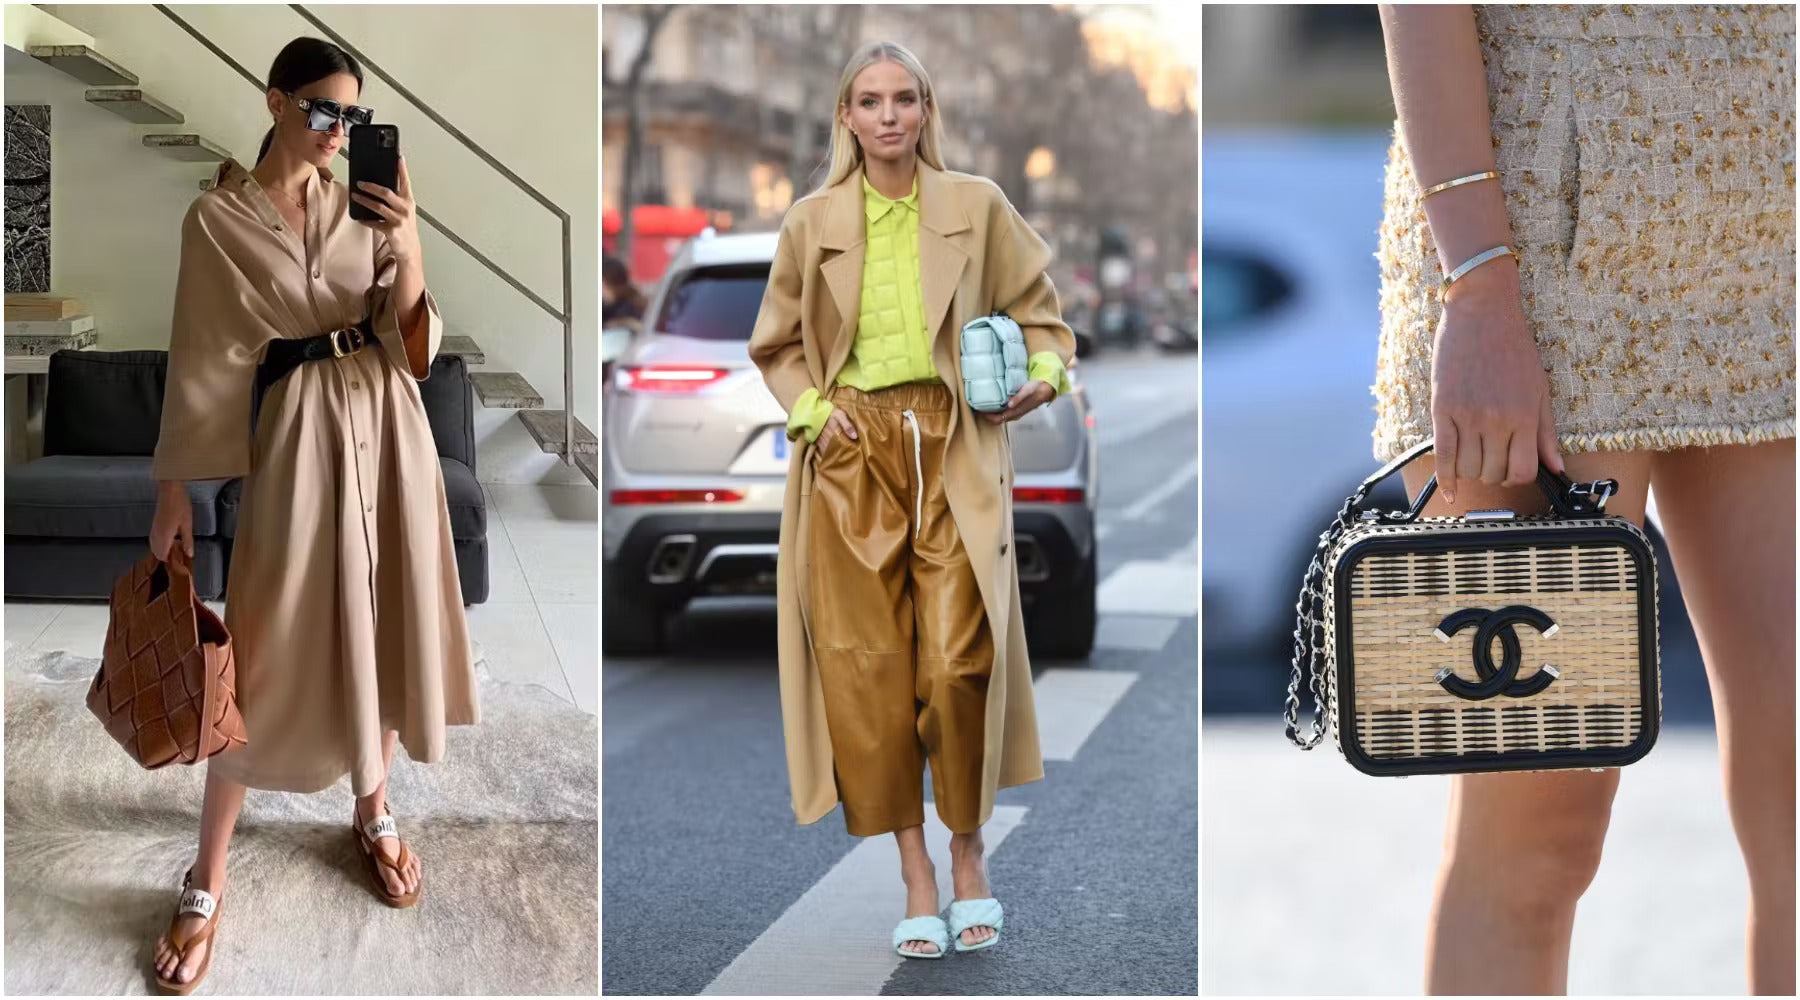 Handbag trends 2023: These are the 8 bag styles to watch out for